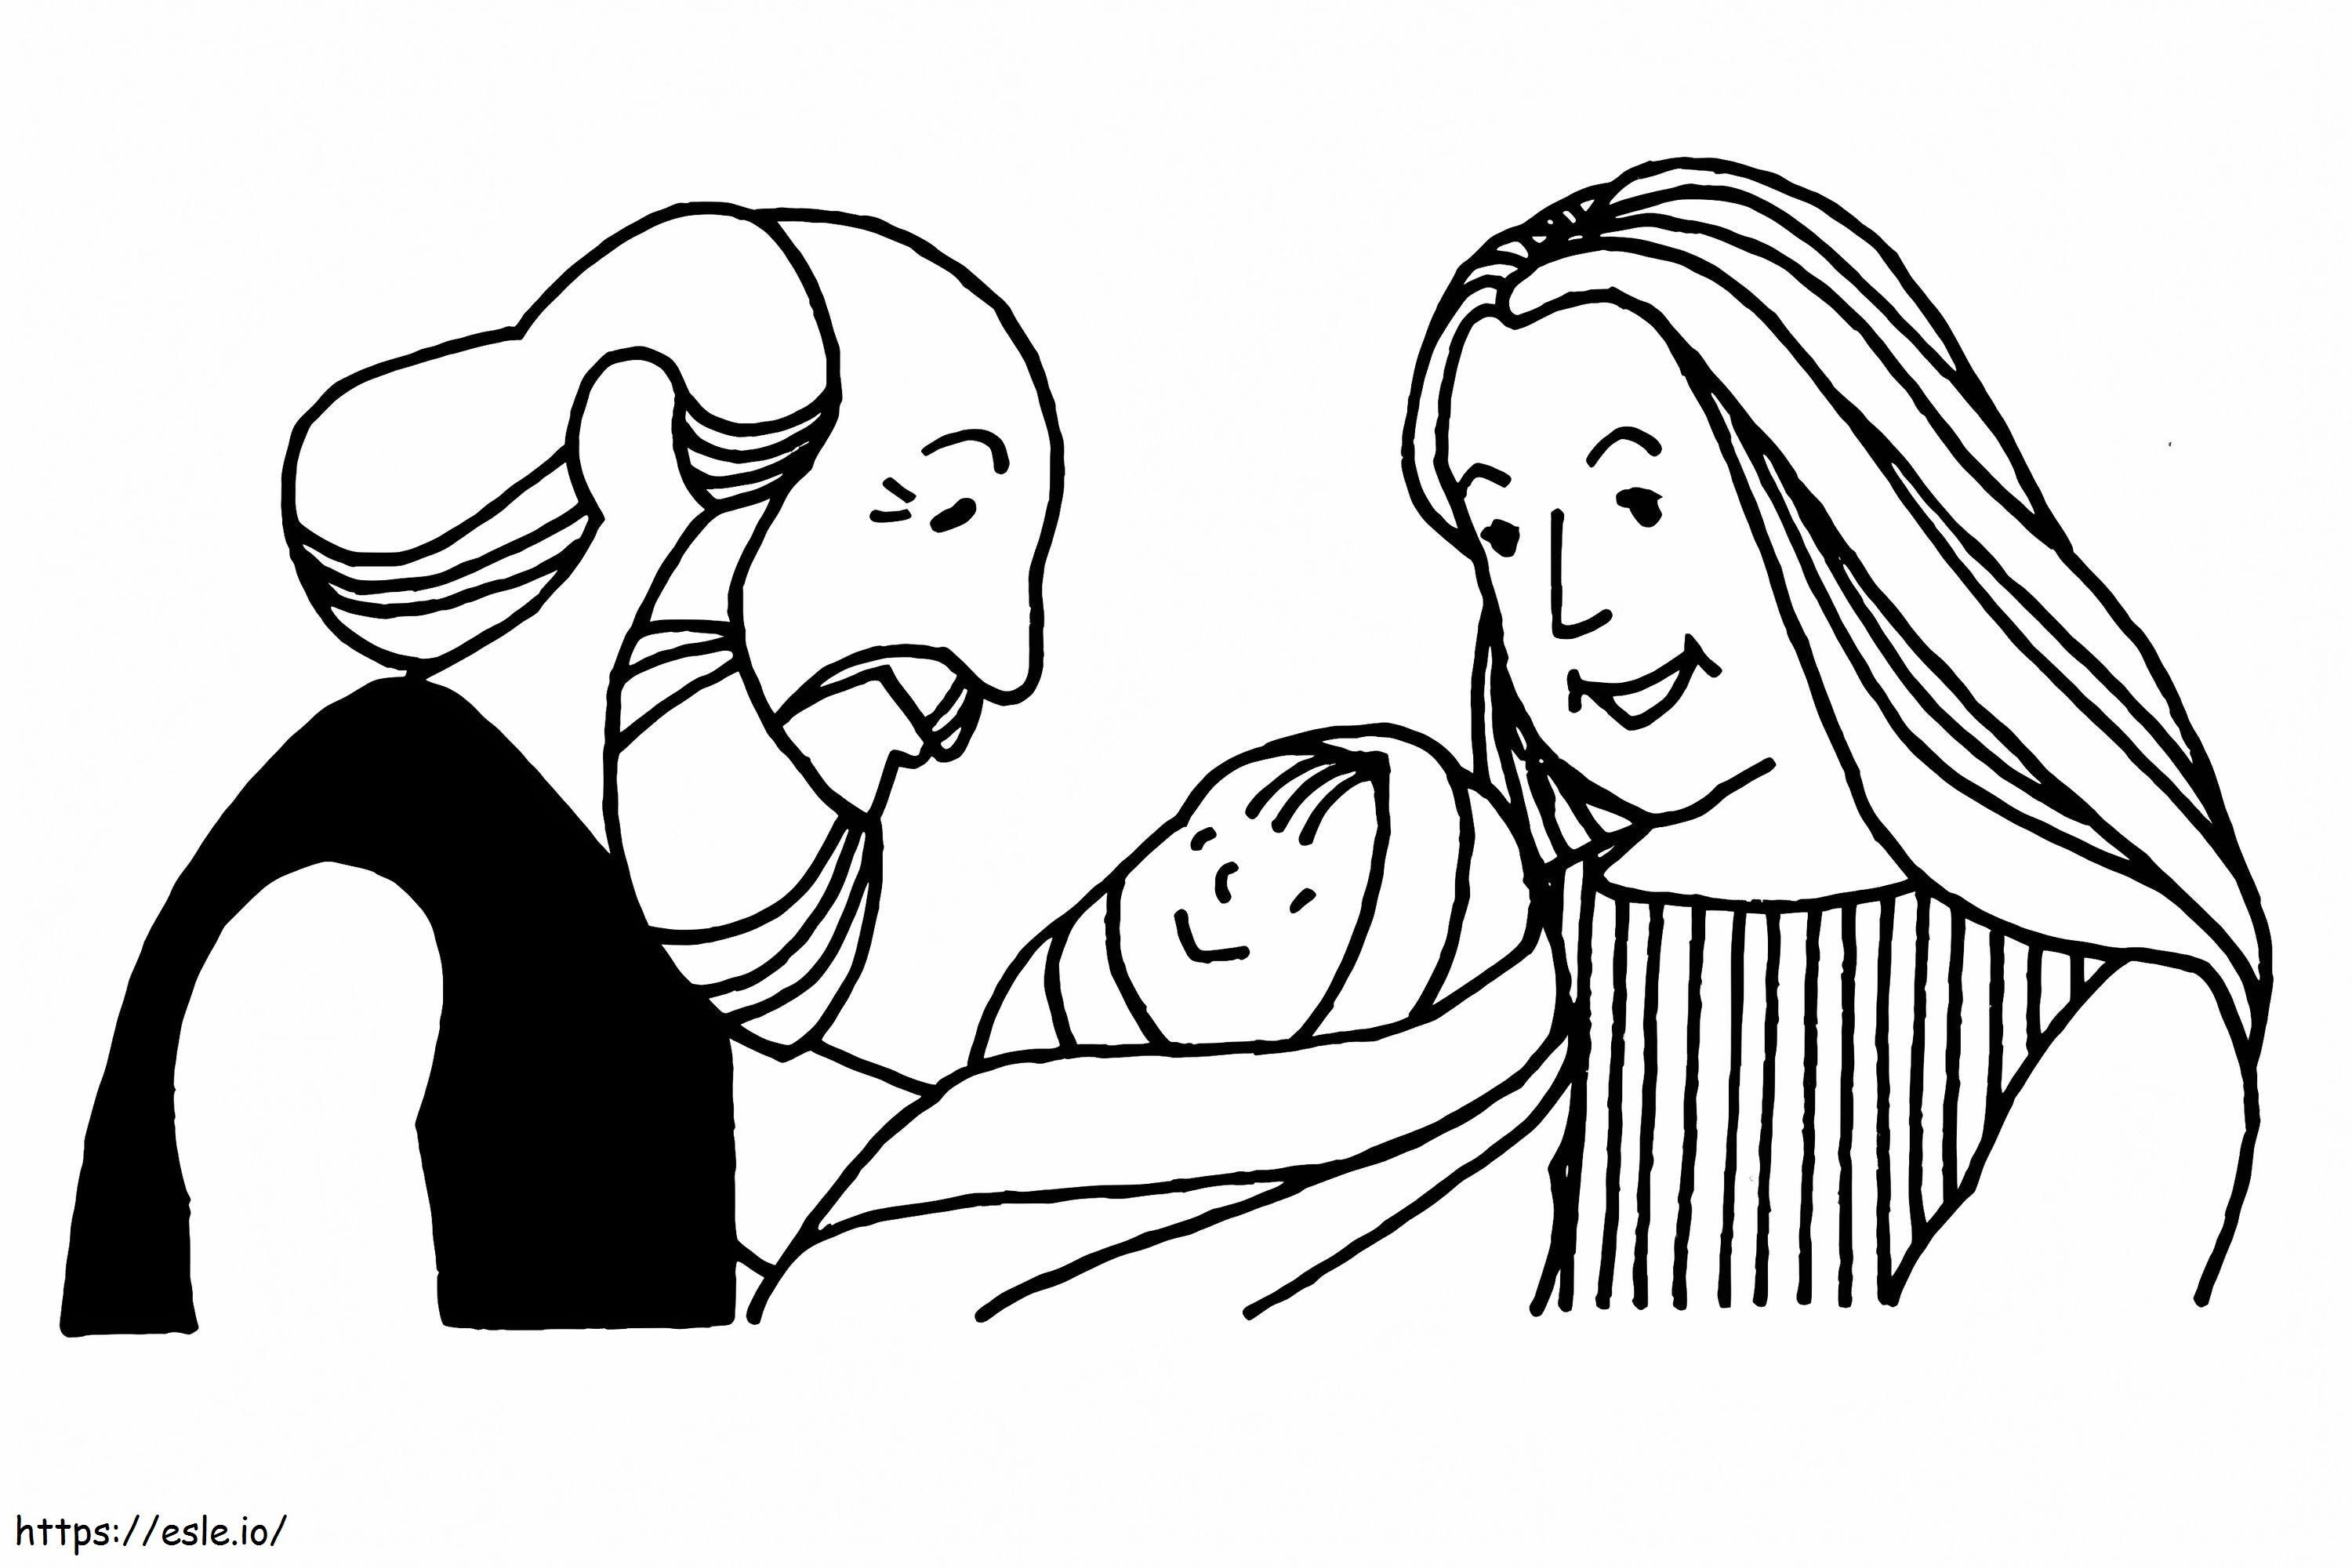 Abraham And Sarah Story coloring page